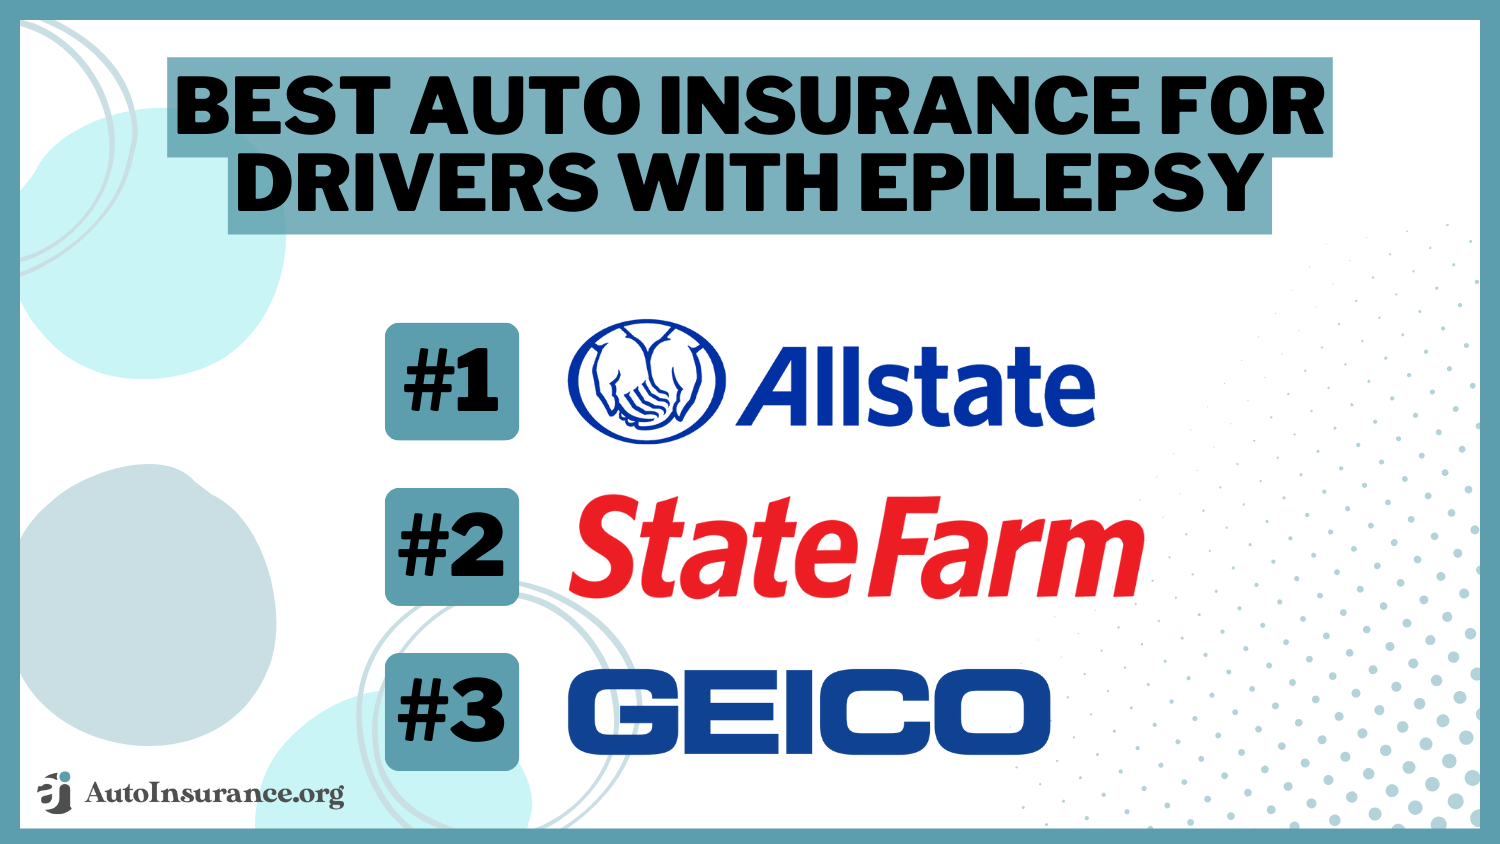 Best Auto Insurance for Drivers with Epilepsy: Allstate, State Farm, and Geico